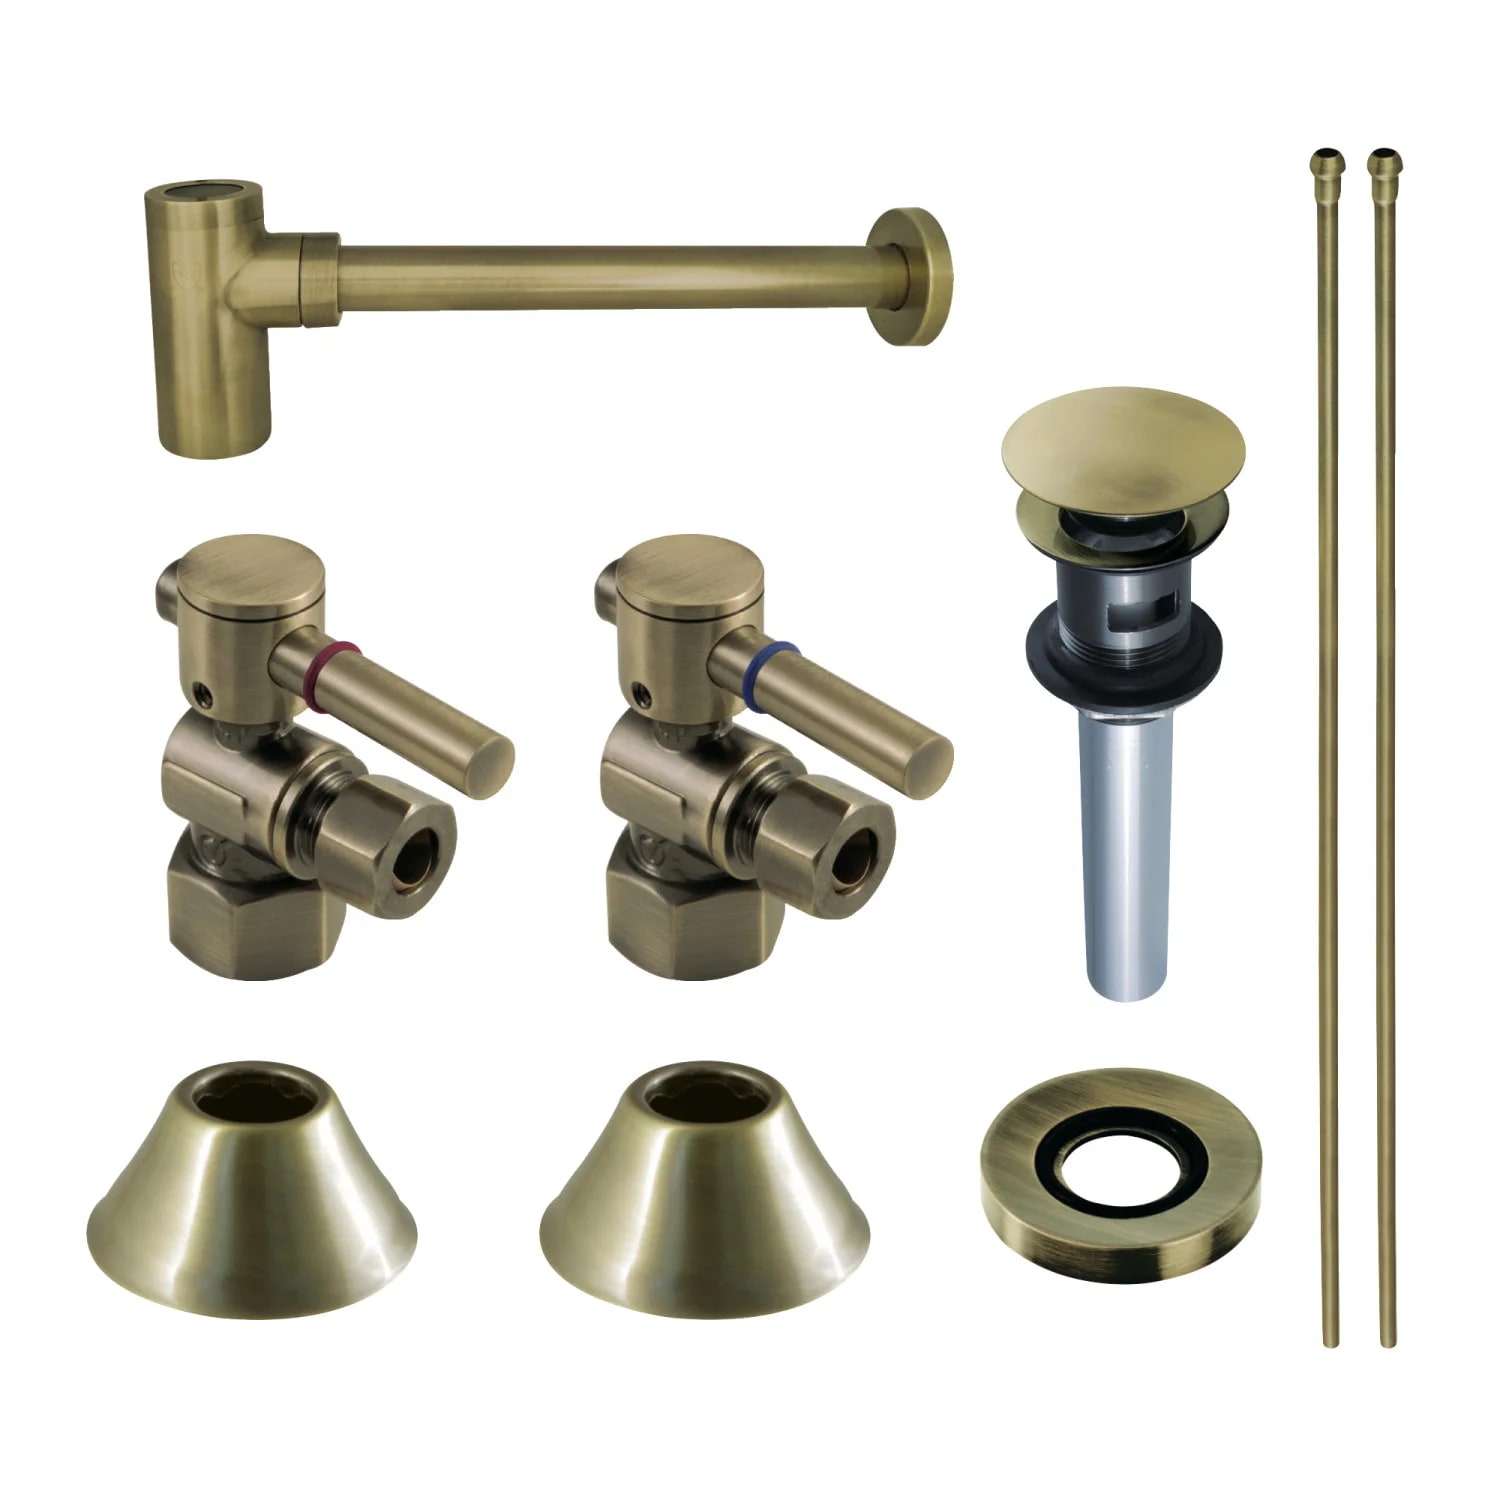 Kingston Brass CC43103DLVOKB30 Antique Brass Trimscape Sink Accessories and Parts Plumbing Sink Trim Kit with Bottle Trap and Overflow Drain - FaucetDirect.com